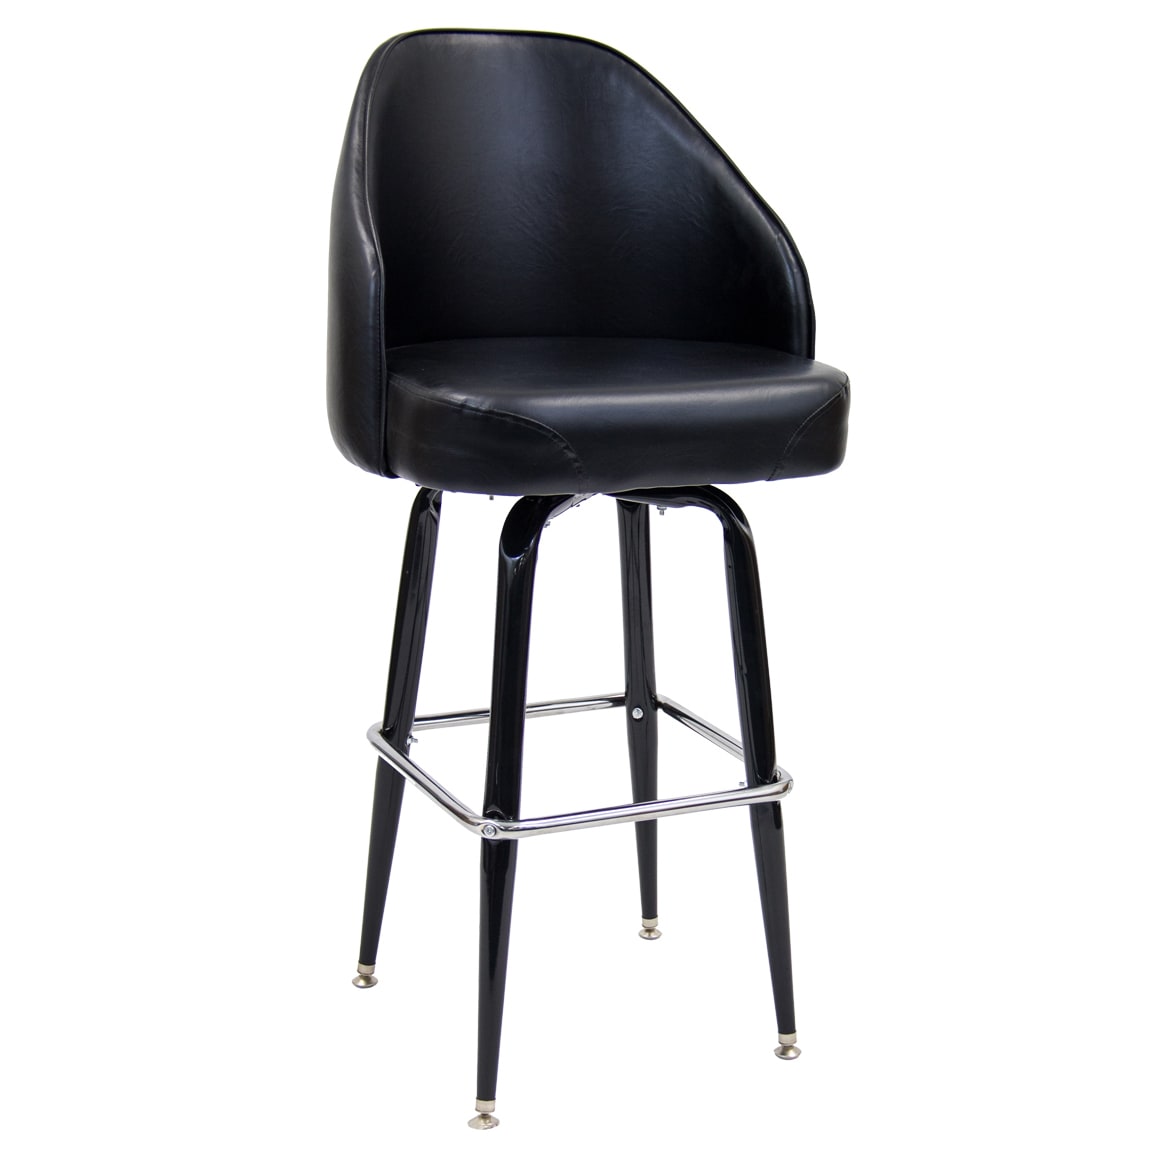 Swivel Bar Stool With Black Coated Frame & Extra Large Curved Bucket Seat